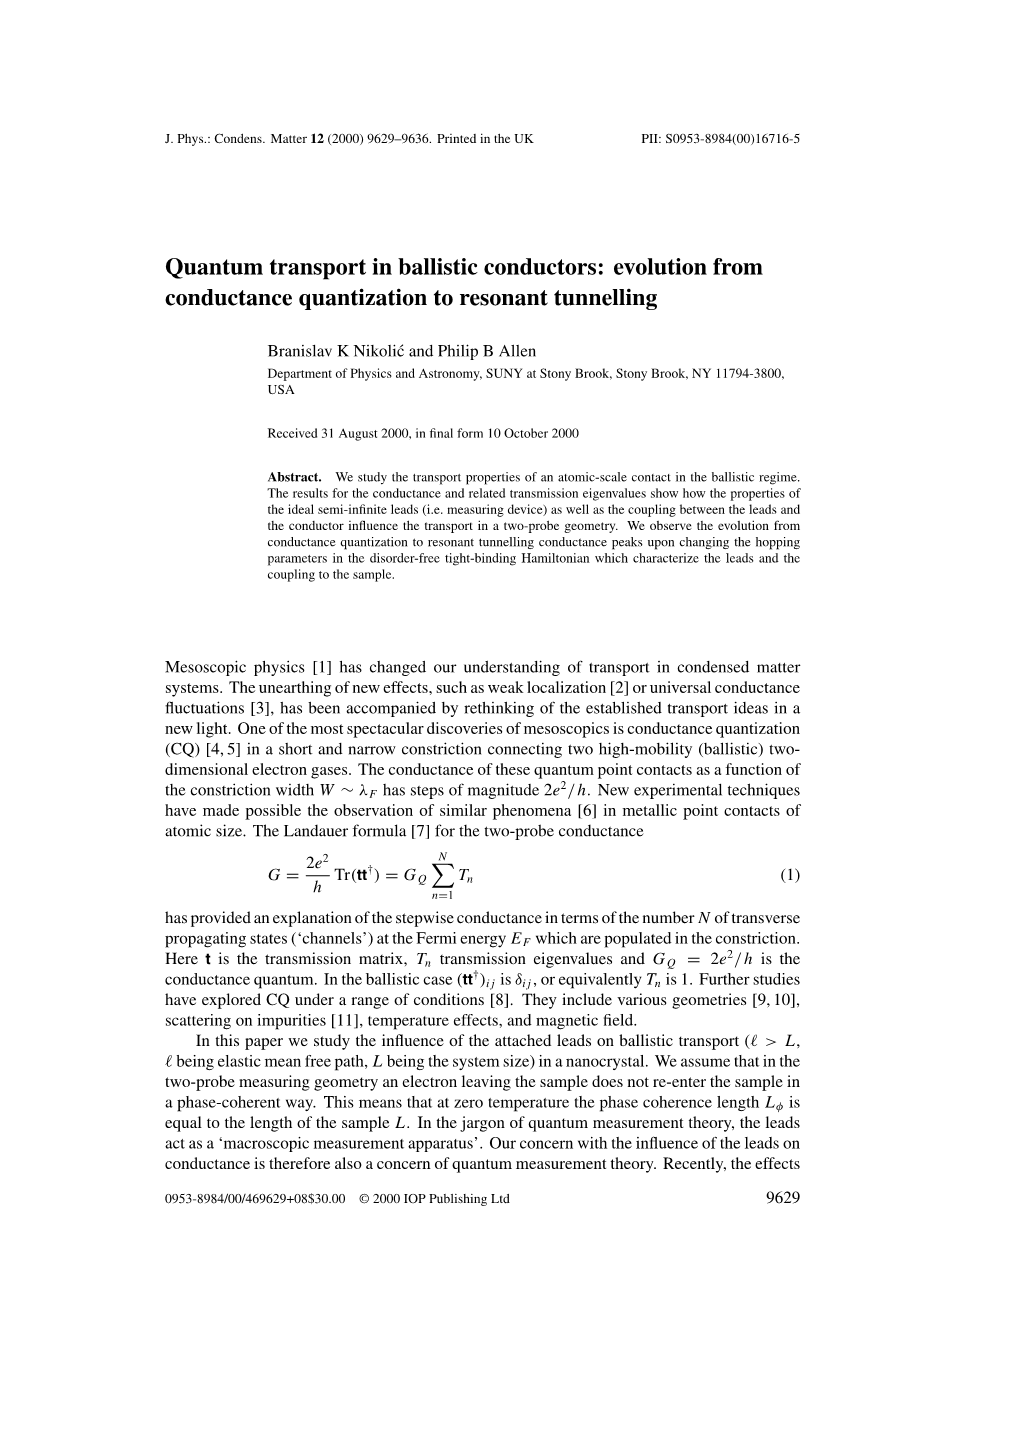 Quantum Transport in Ballistic Conductors: Evolution from Conductance Quantization to Resonant Tunnelling